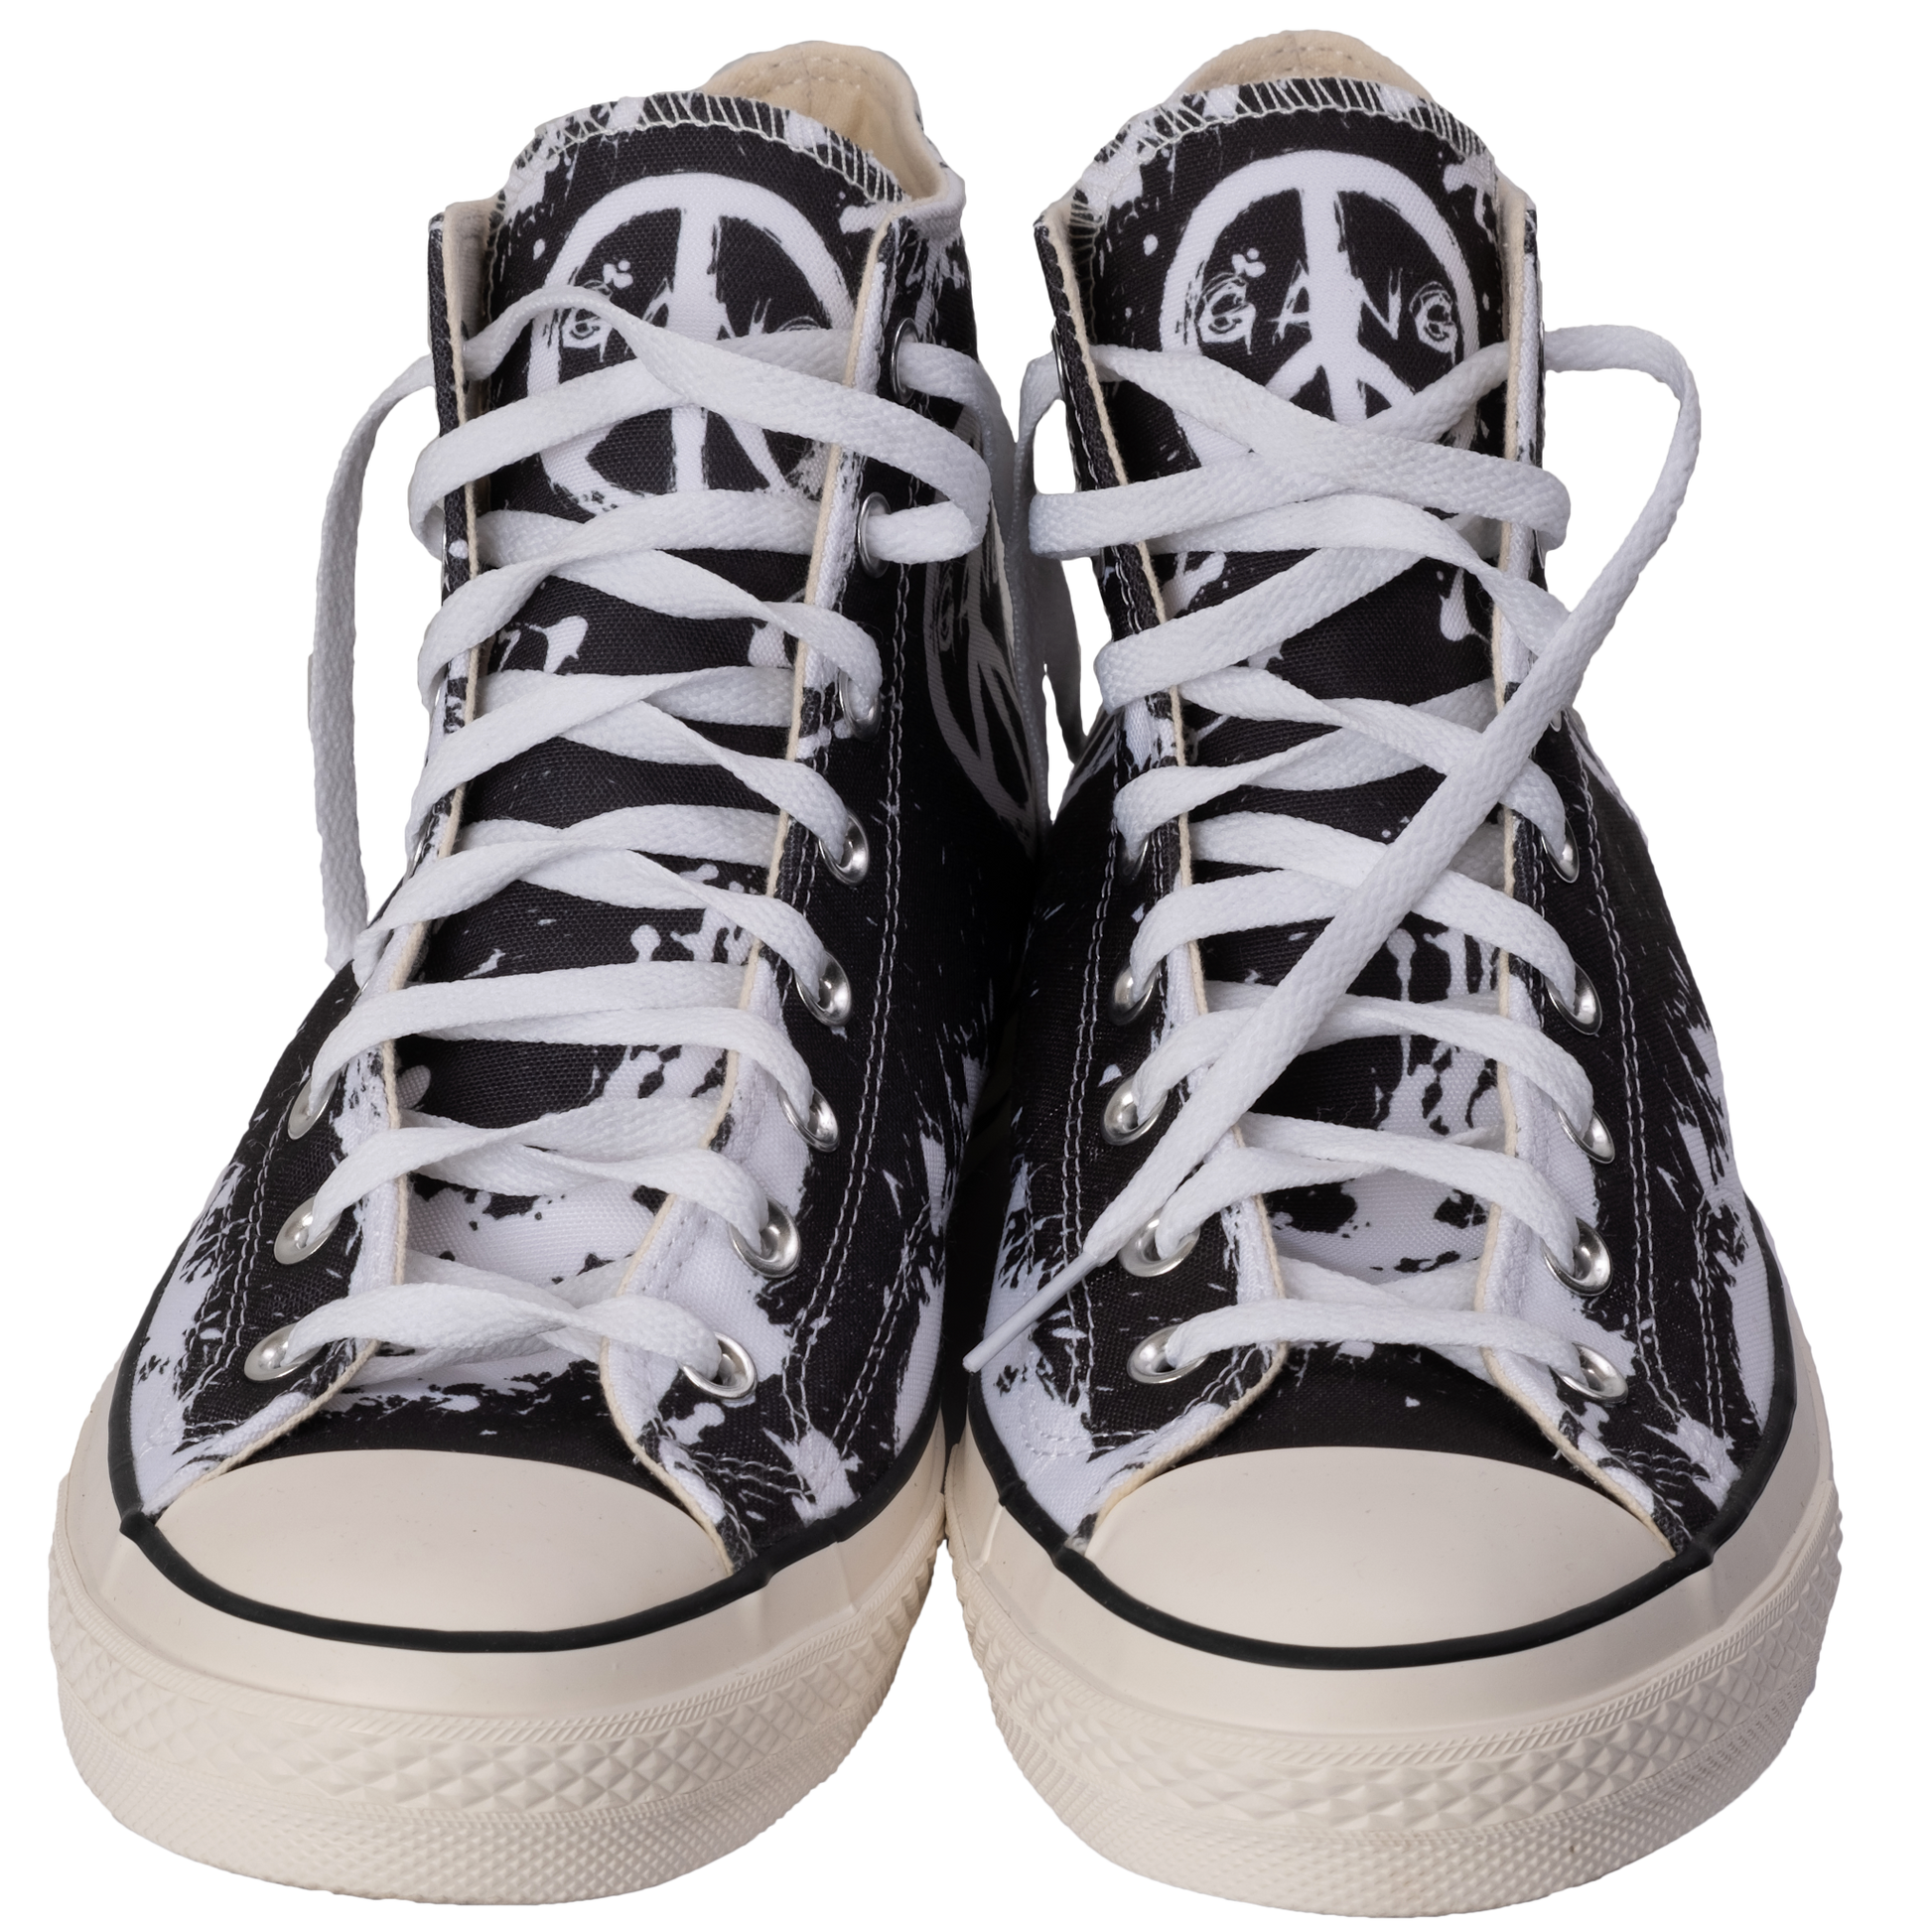  High Top shoes" Peace Grunge " - PEACE GANG 2021